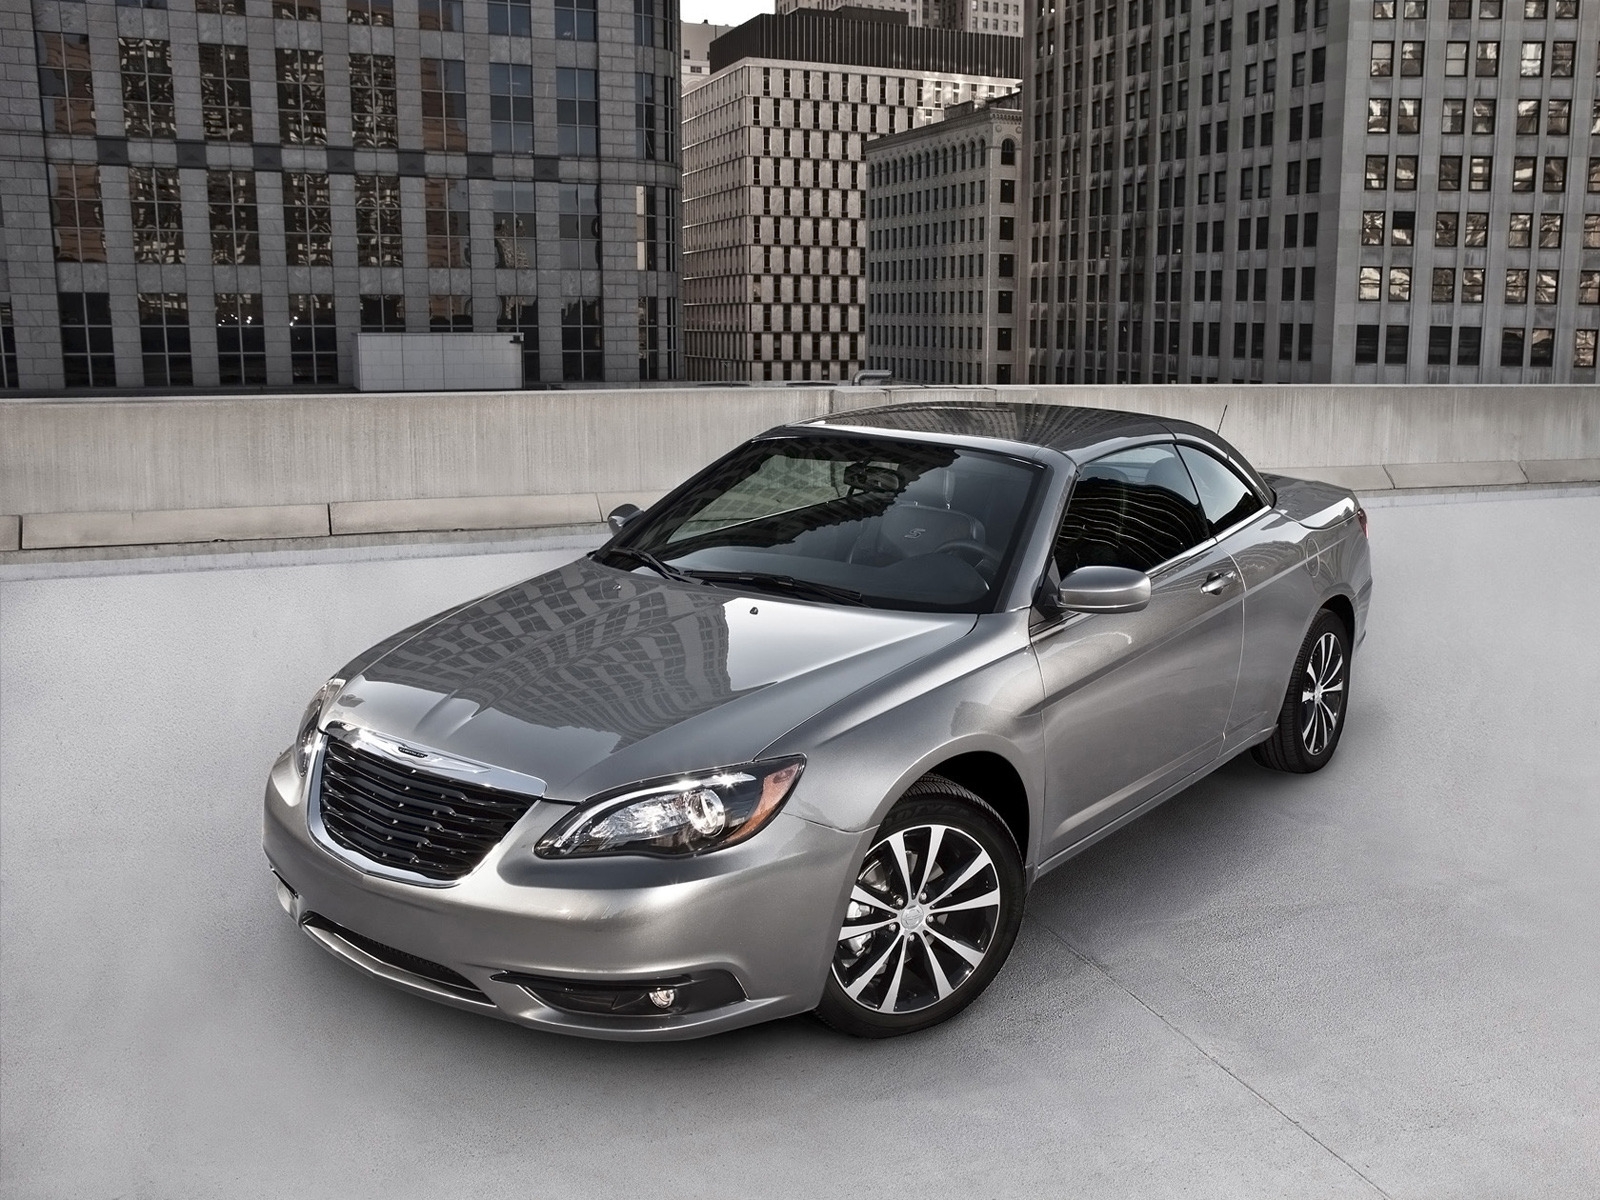 2011 Chrysler 200 S Convertible for 1600 x 1200 resolution